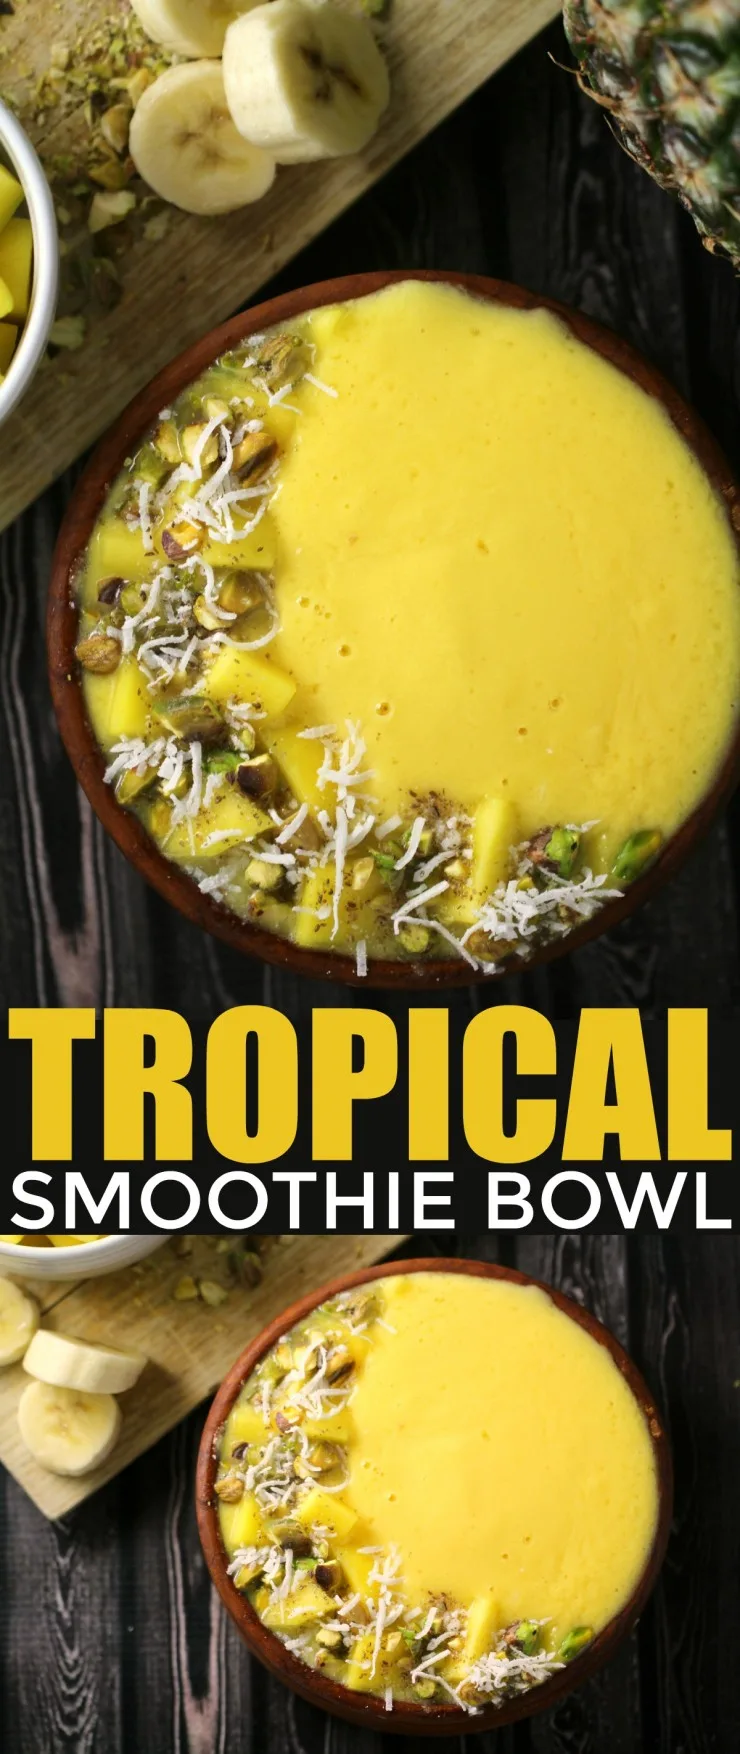 This Tropical Smoothie Bowl is a great choice for breakfast with the mellow sweetness of bananas and mango combined with the tang of pineapple for an irresistibly fresh bowl. 